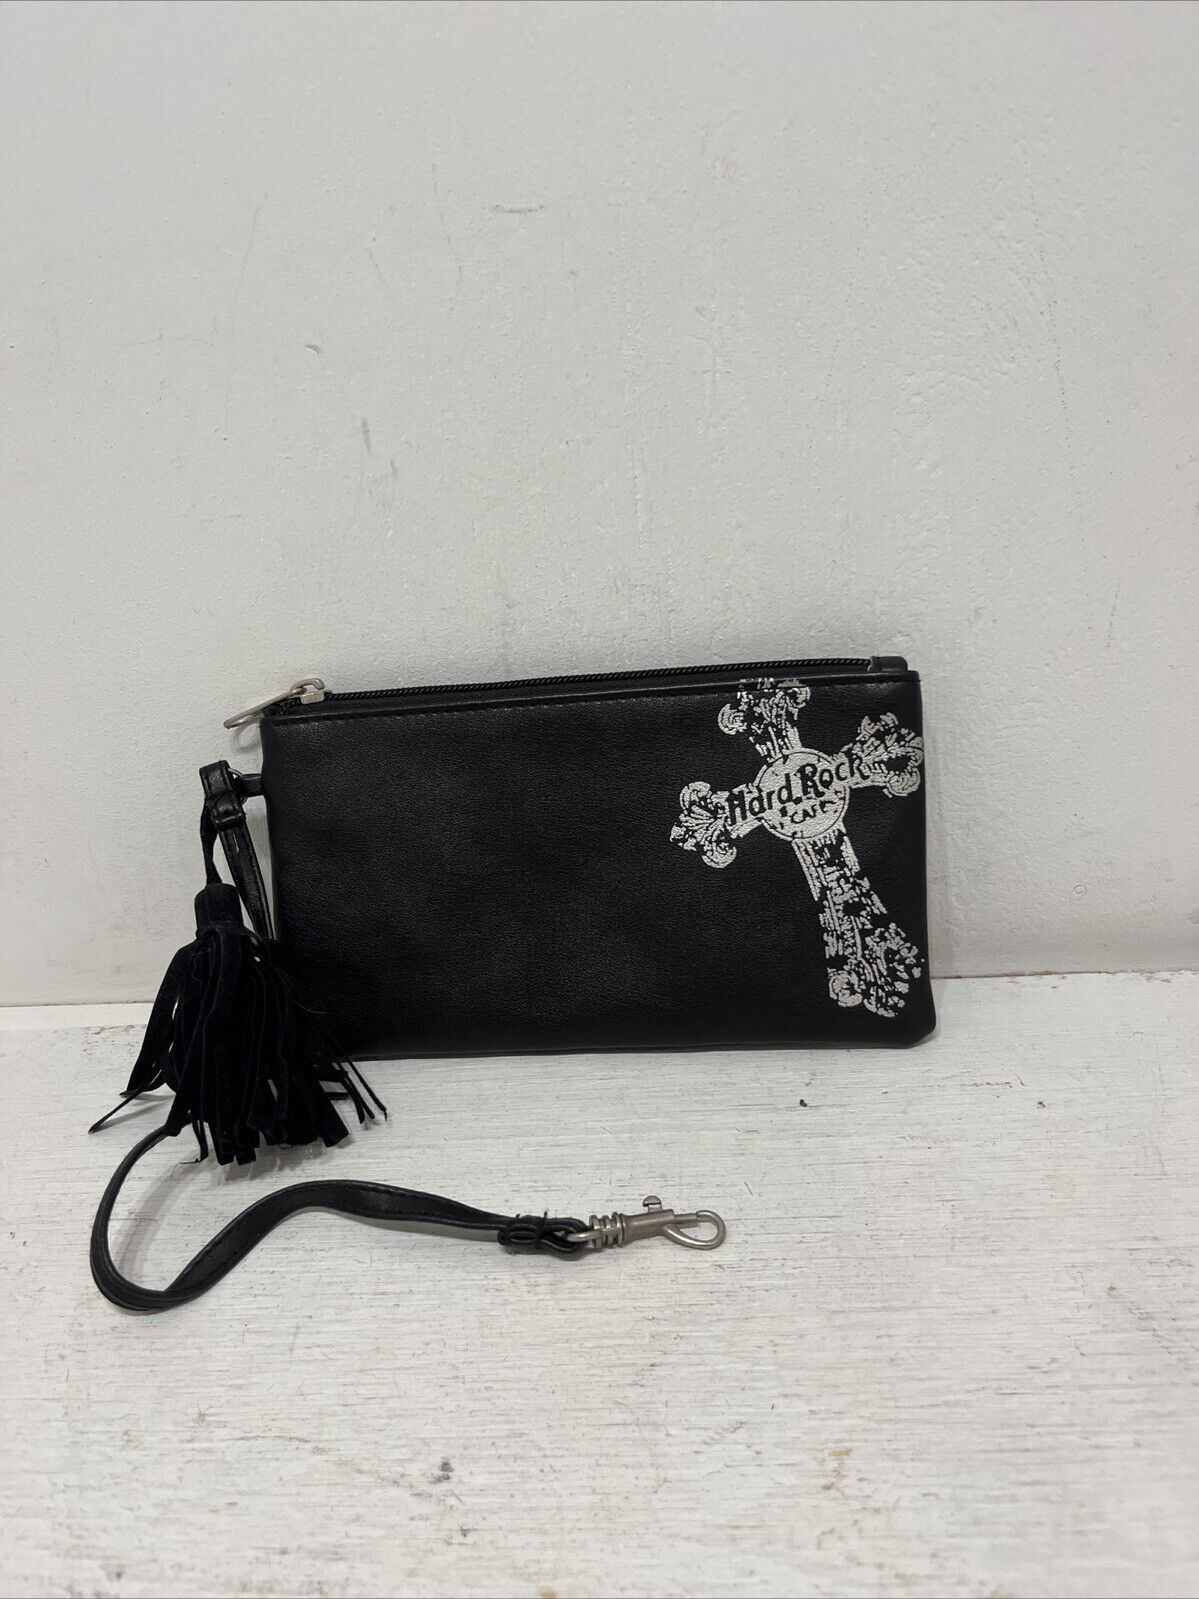 Preowned Authentic Hard Rock Cafe Black Wristlet Faux Leather Cross Tassel